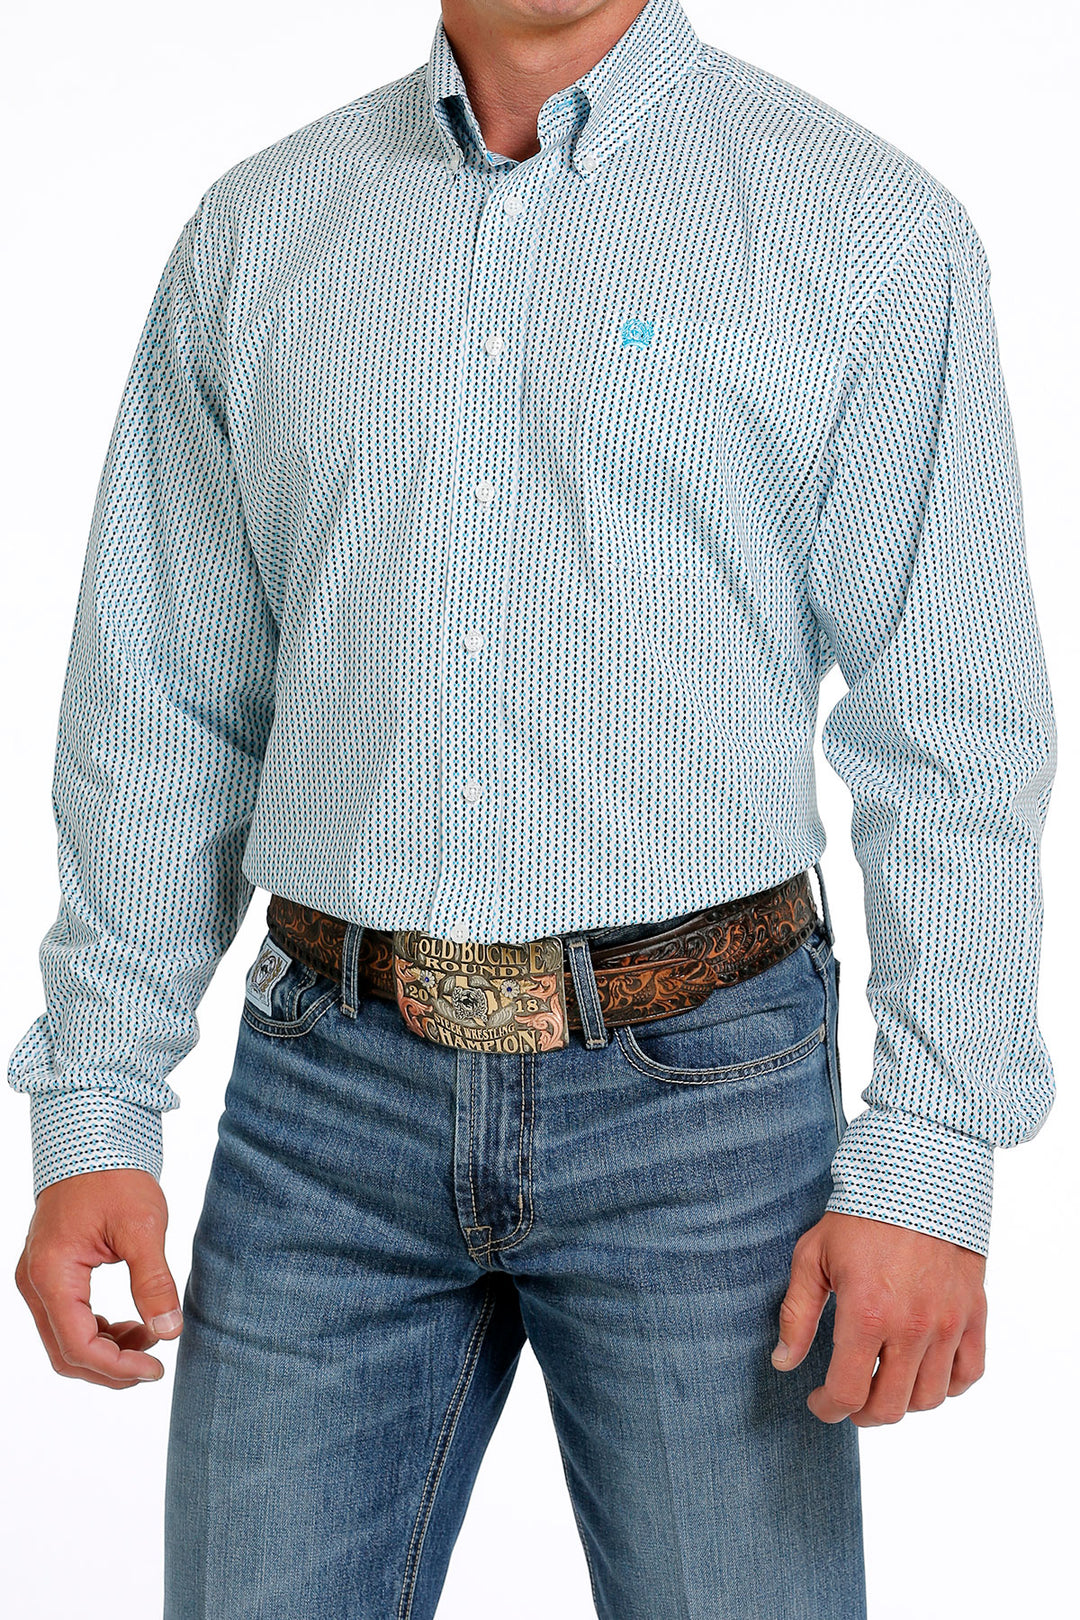 Cinch Men's Stretch Turquoise and White Geometric Button Down Shirt